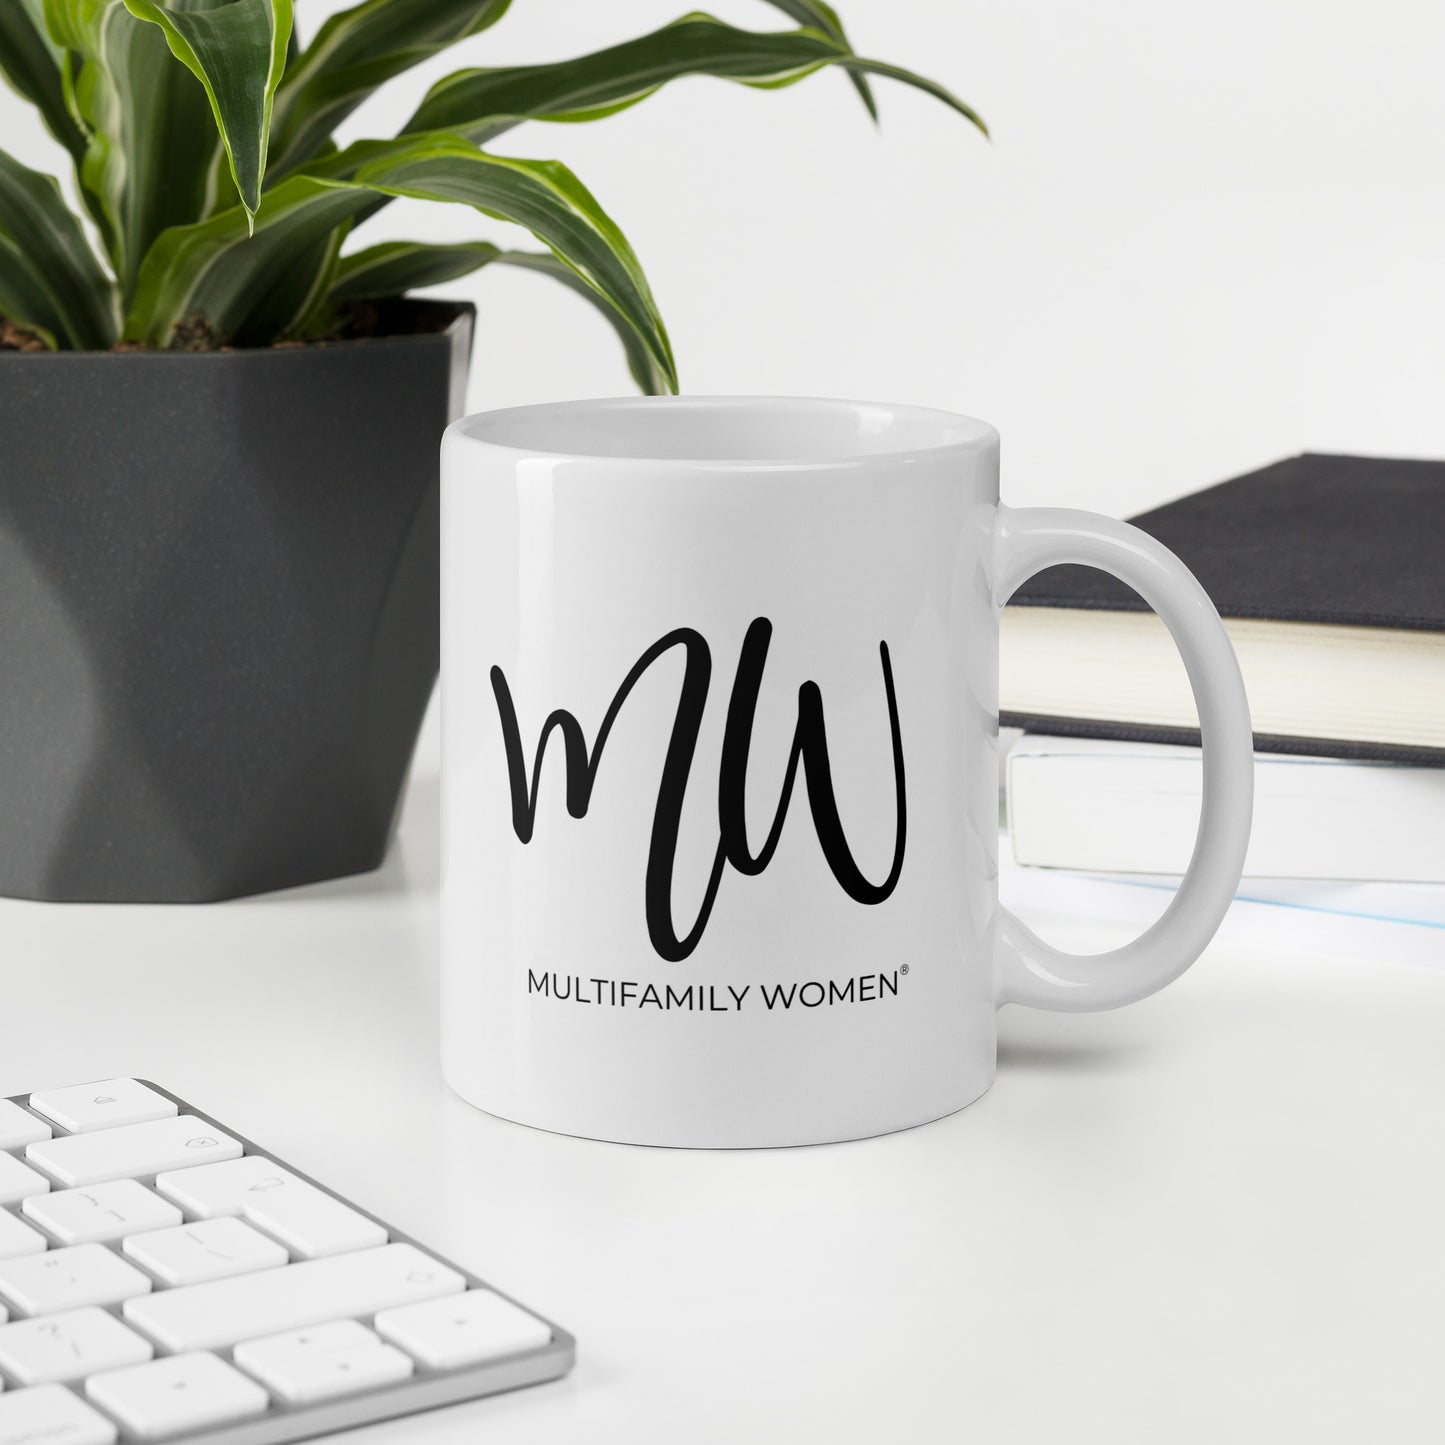 The Morning Muse - White Glossy Mug by Multifamily Women®